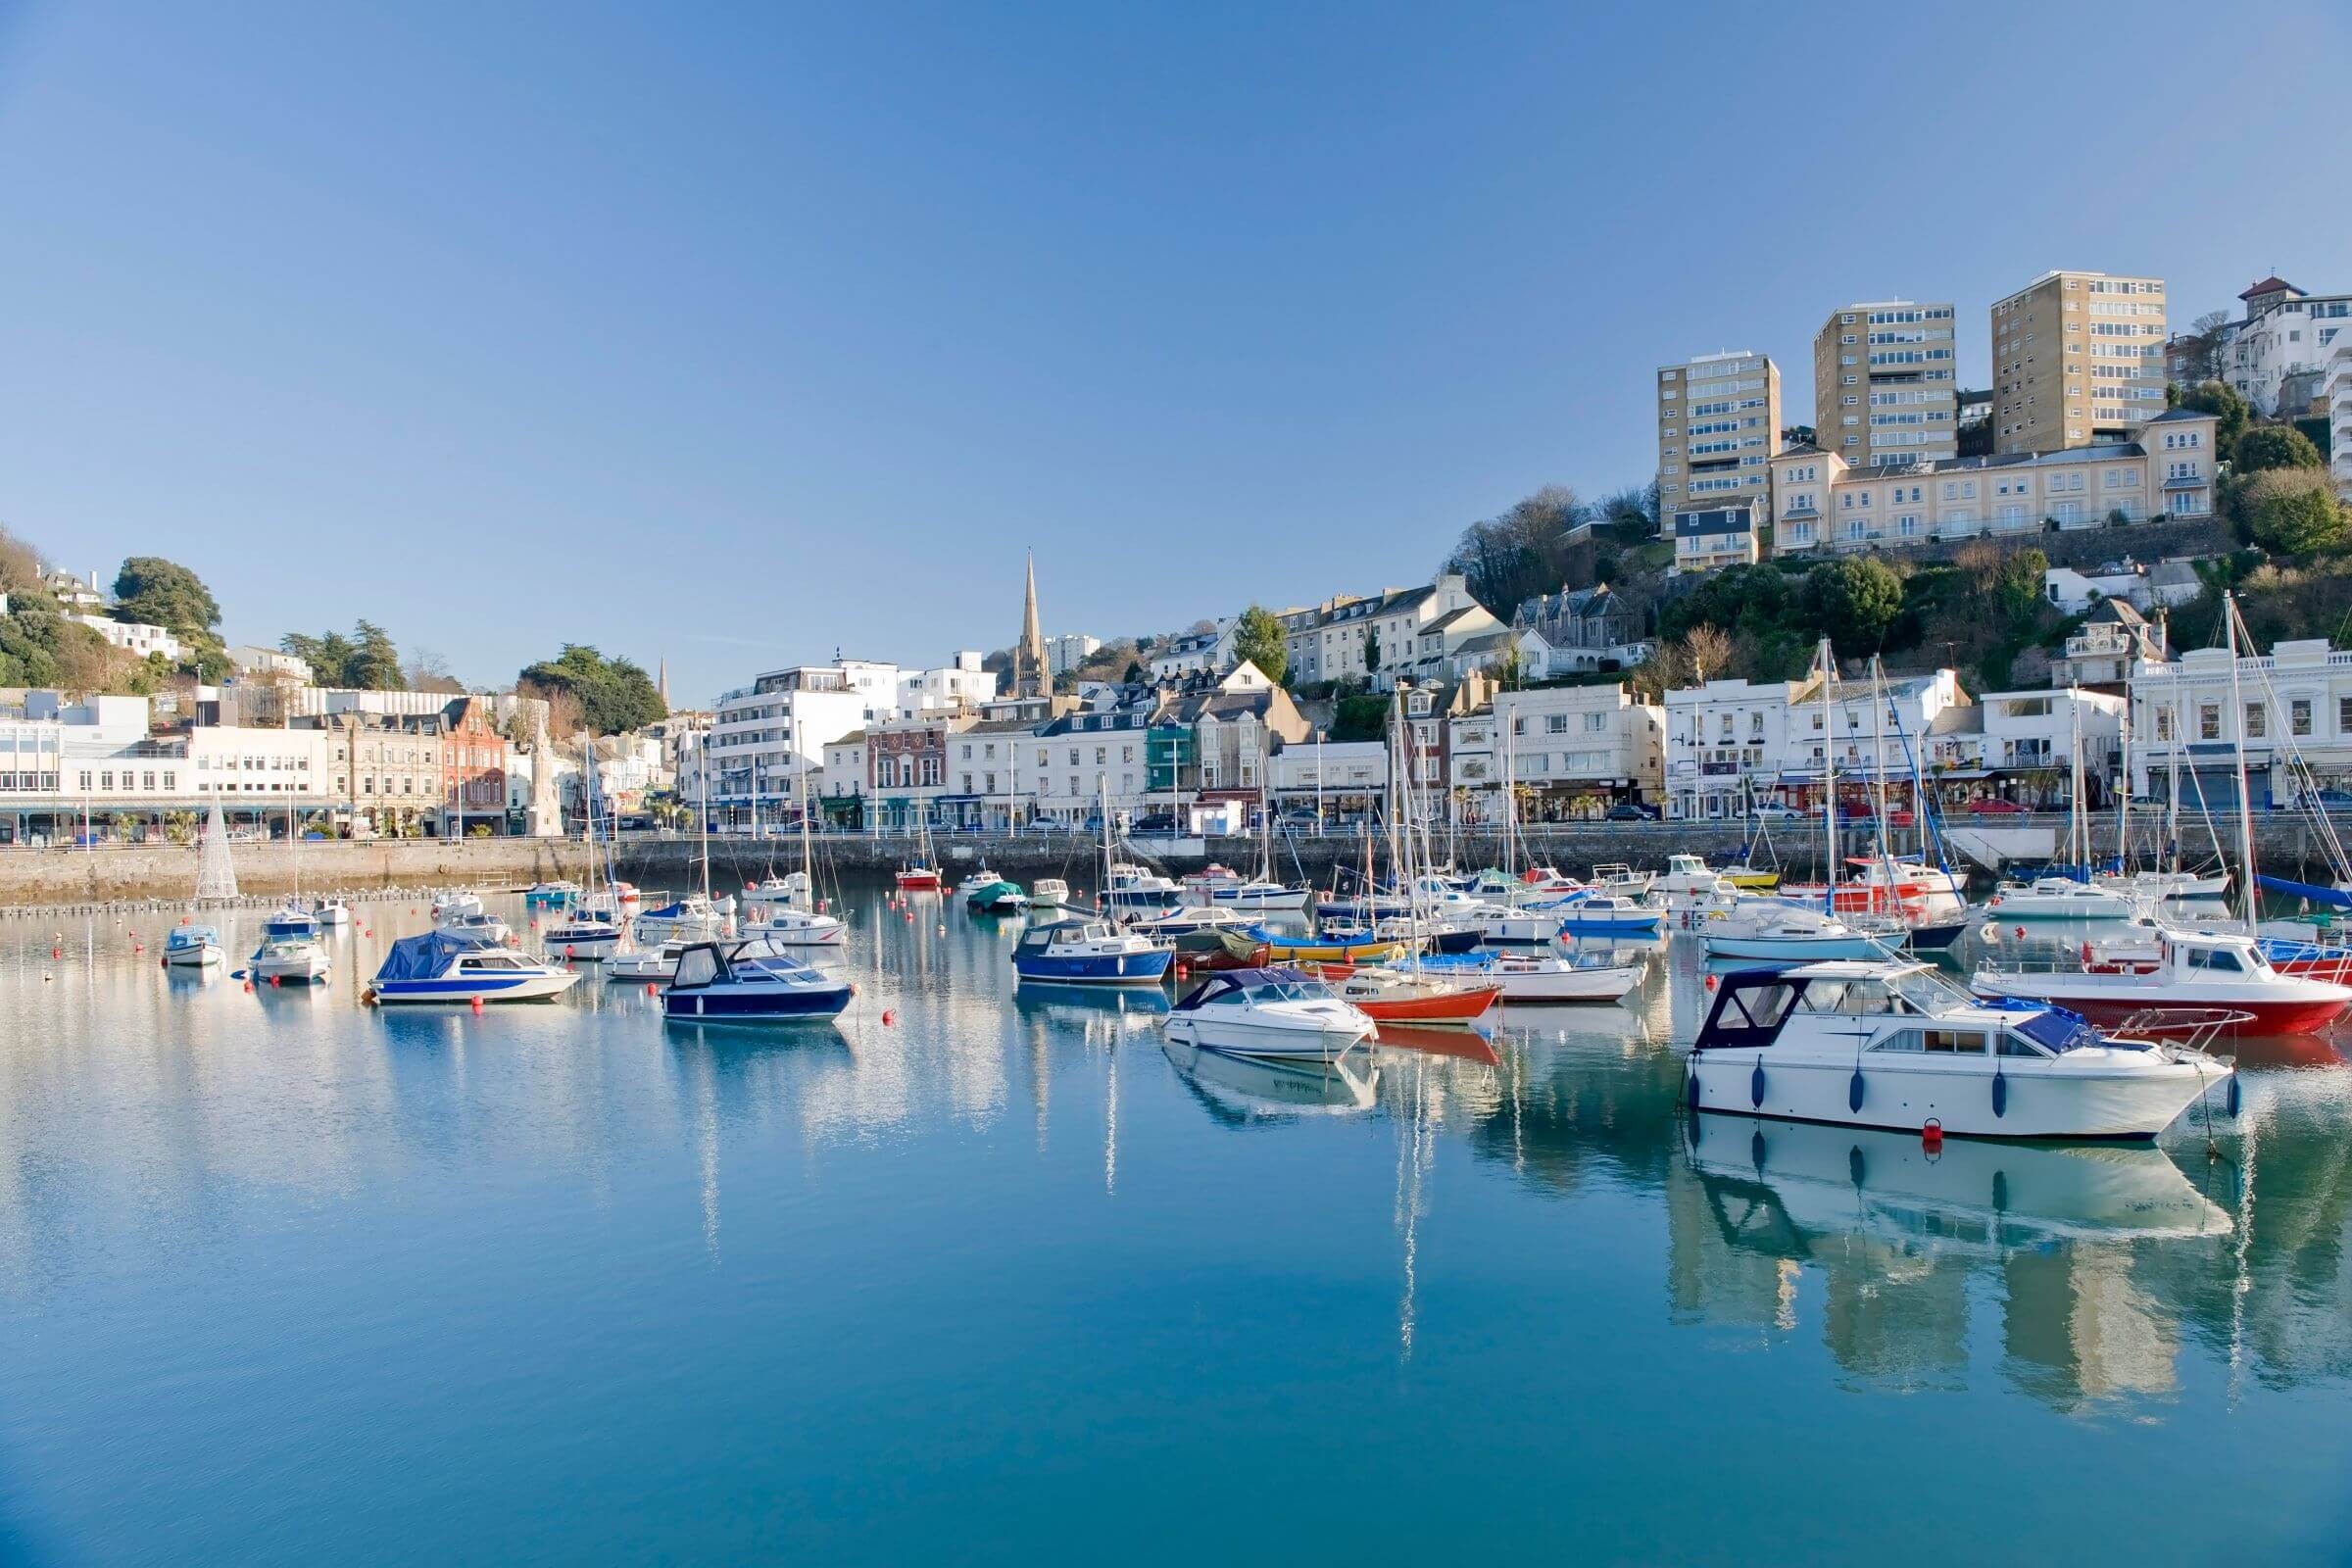 Torquay Travel Guide Visitor Guide To Torquay Sykes Cottages